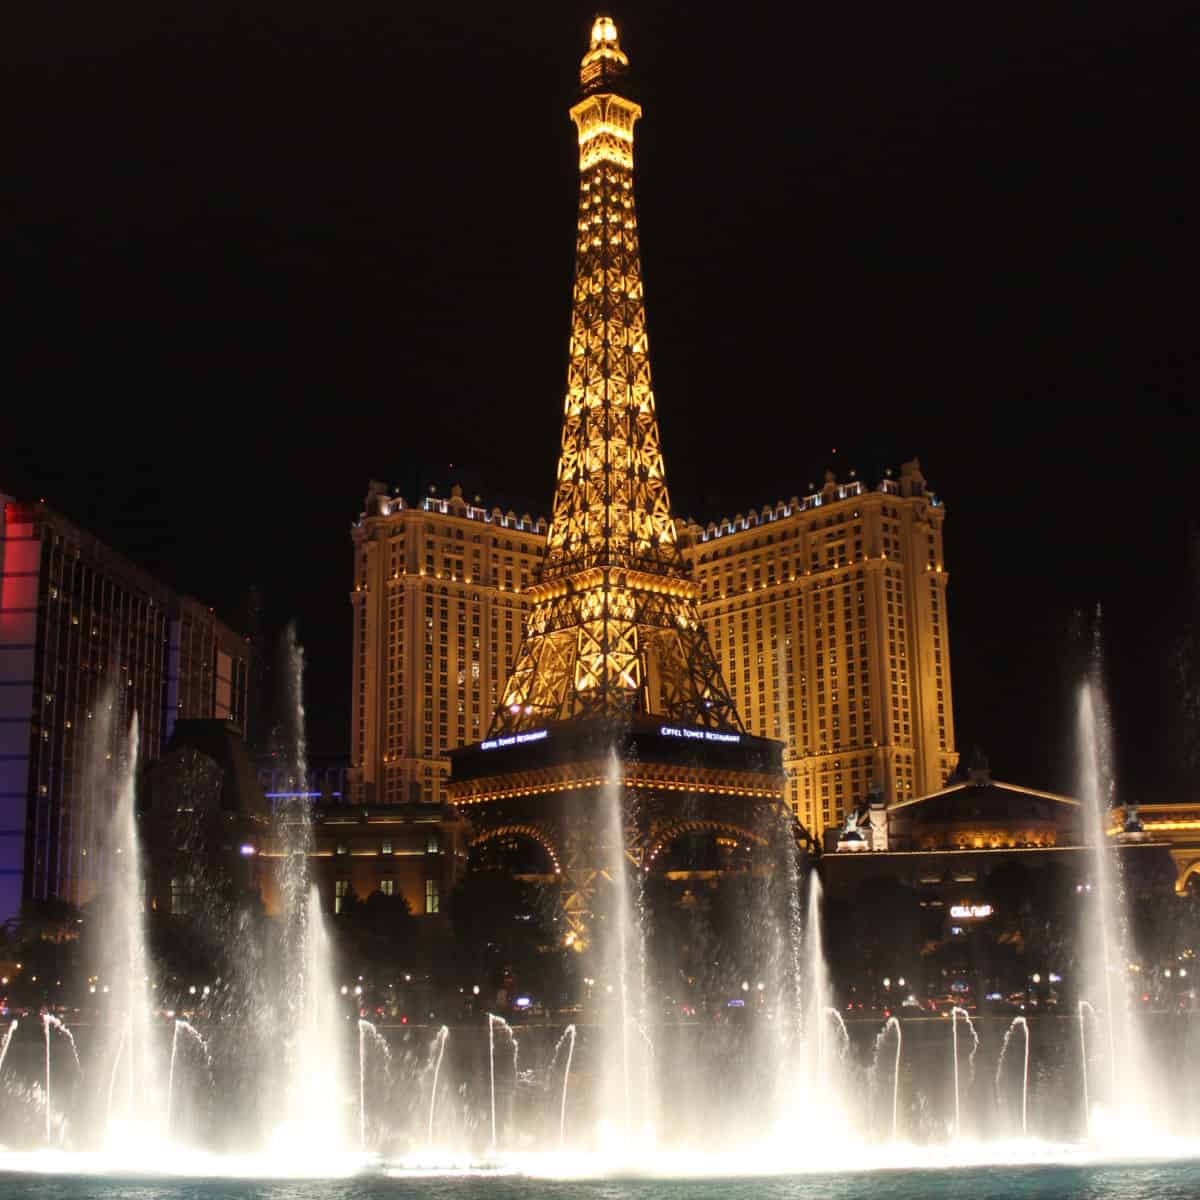 Bellaggio Fountains with the Paris Eiffel Tower lit up in the background